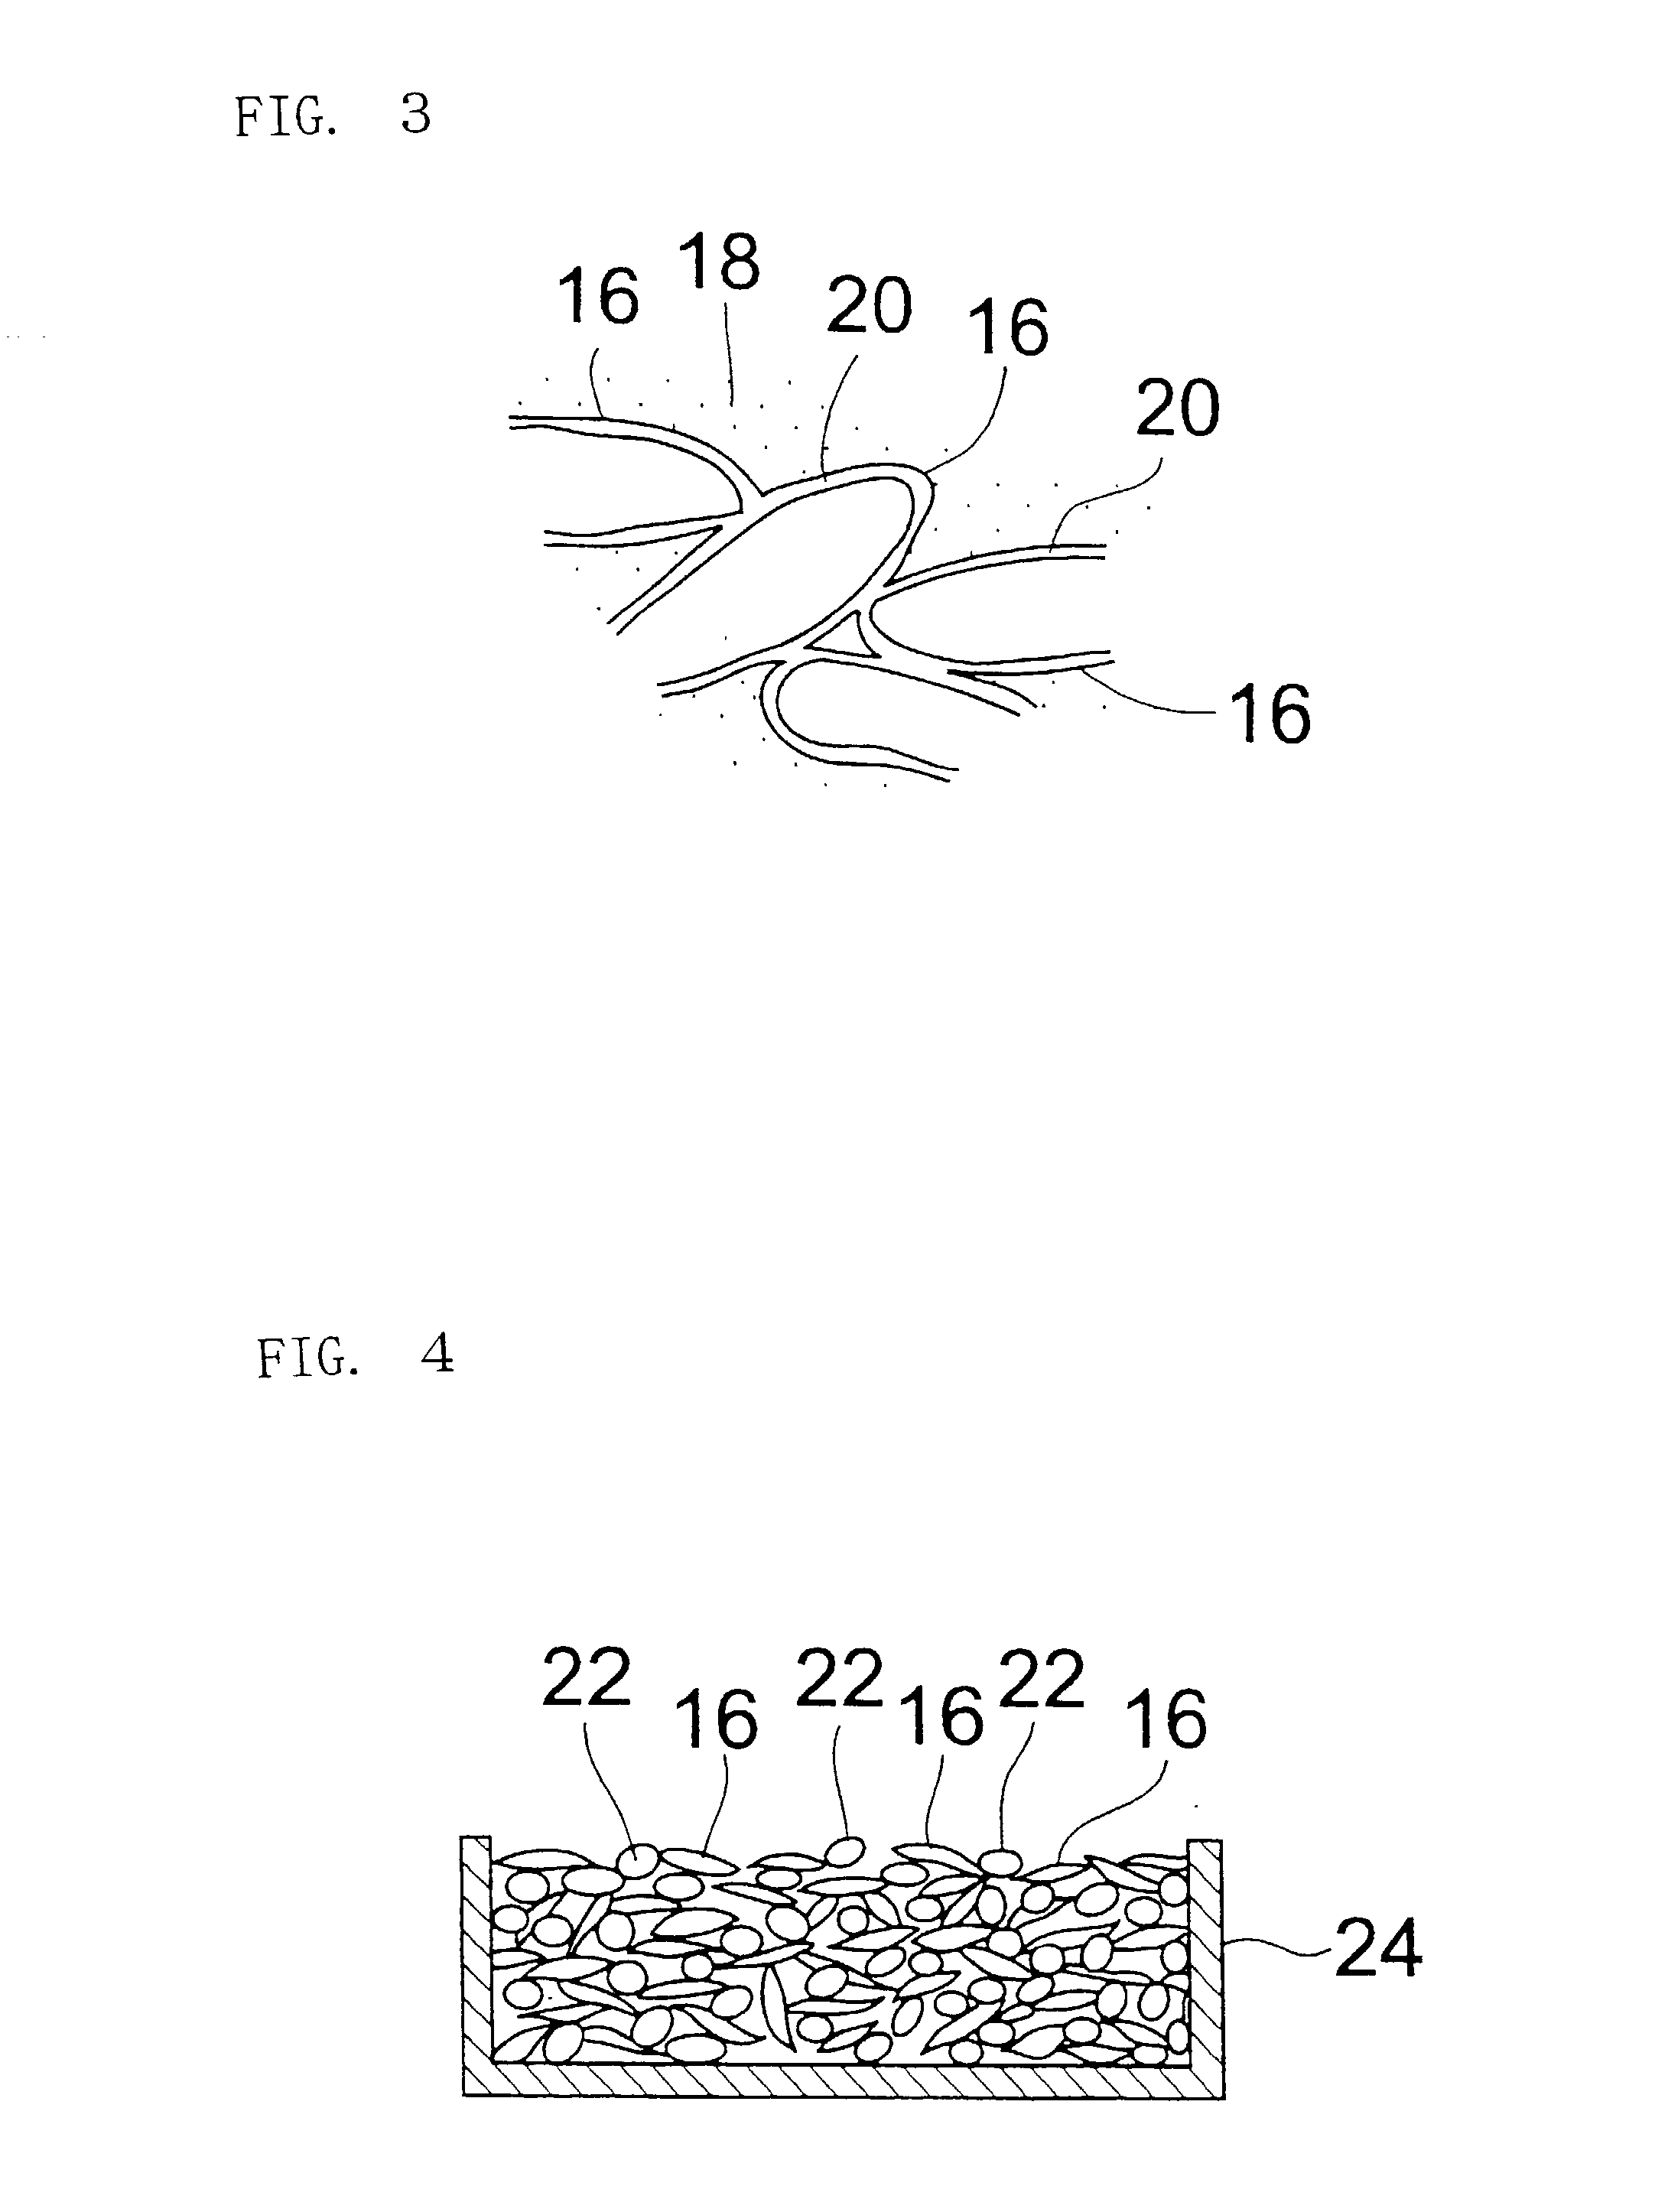 Loading and unloading pallet, forming material and method of producing it